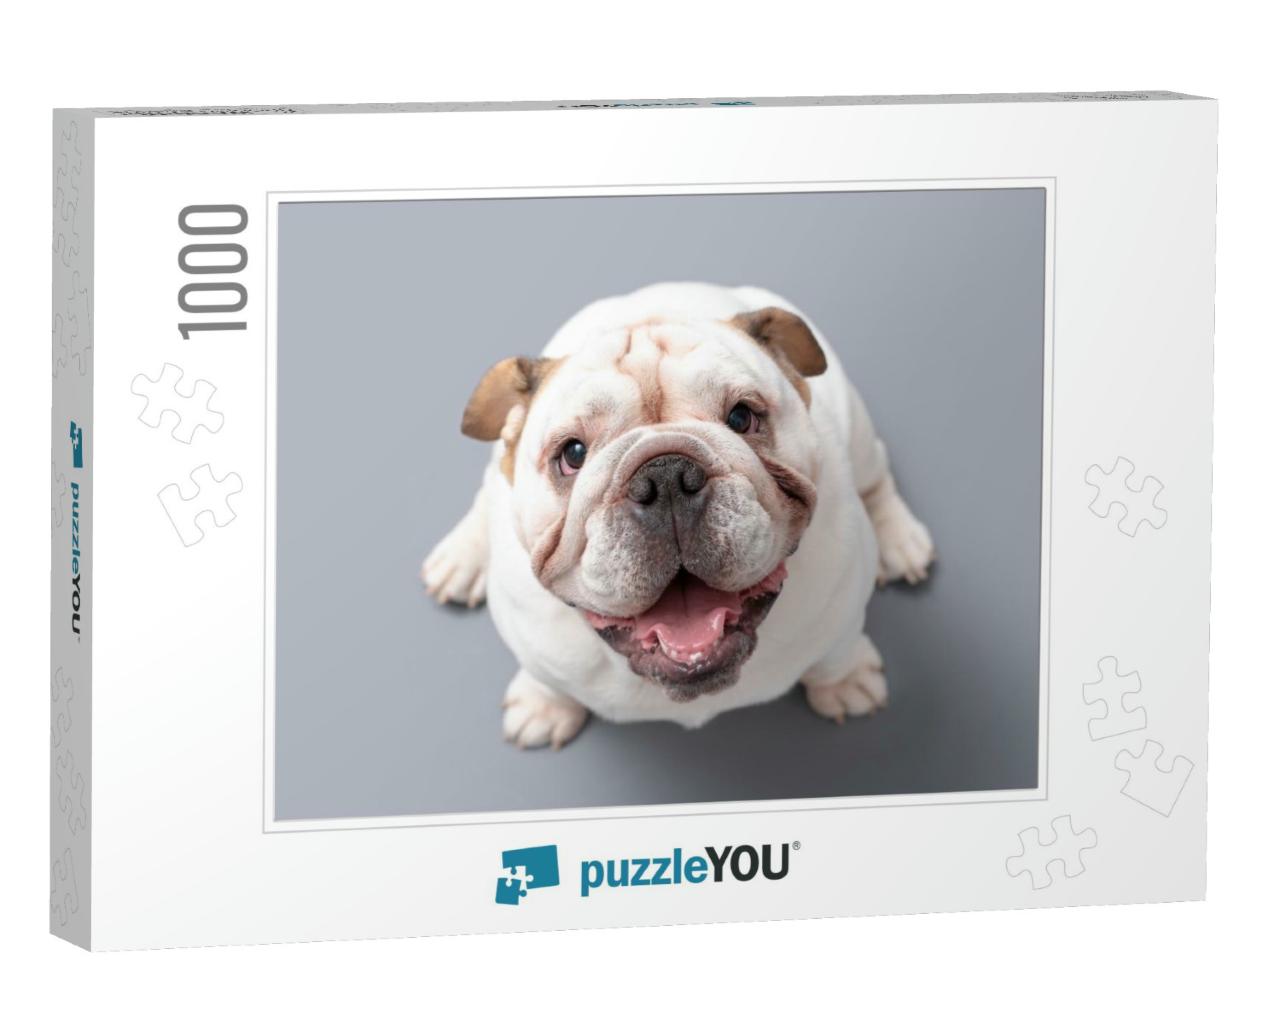 British Bulldog Puppy Looking Up Isolated Against a Grey... Jigsaw Puzzle with 1000 pieces